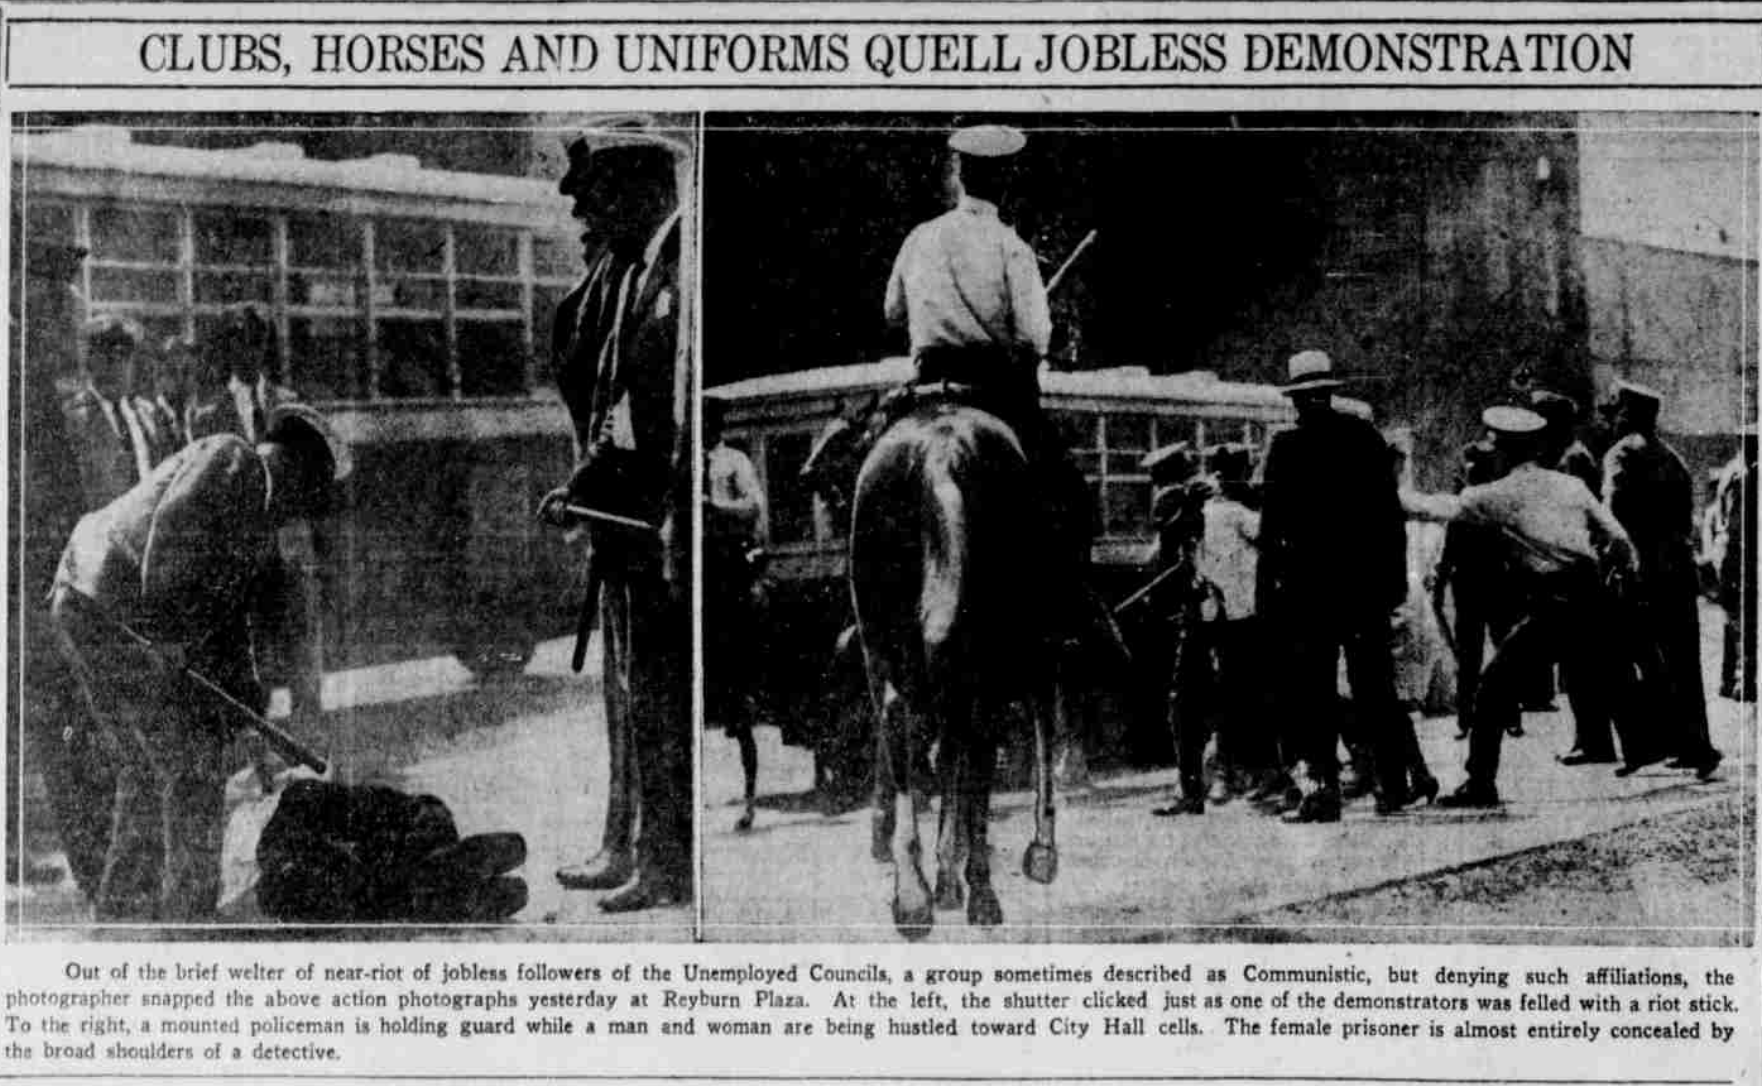   “Clubs, horses and uniforms quell jobless demonstration,” Philadelphia Inquirer, August 26, 1932. The caption reads in part: “At left, the shutter clicked just as one of the demonstrators was felled with a riot stick. To the right, a mounted police